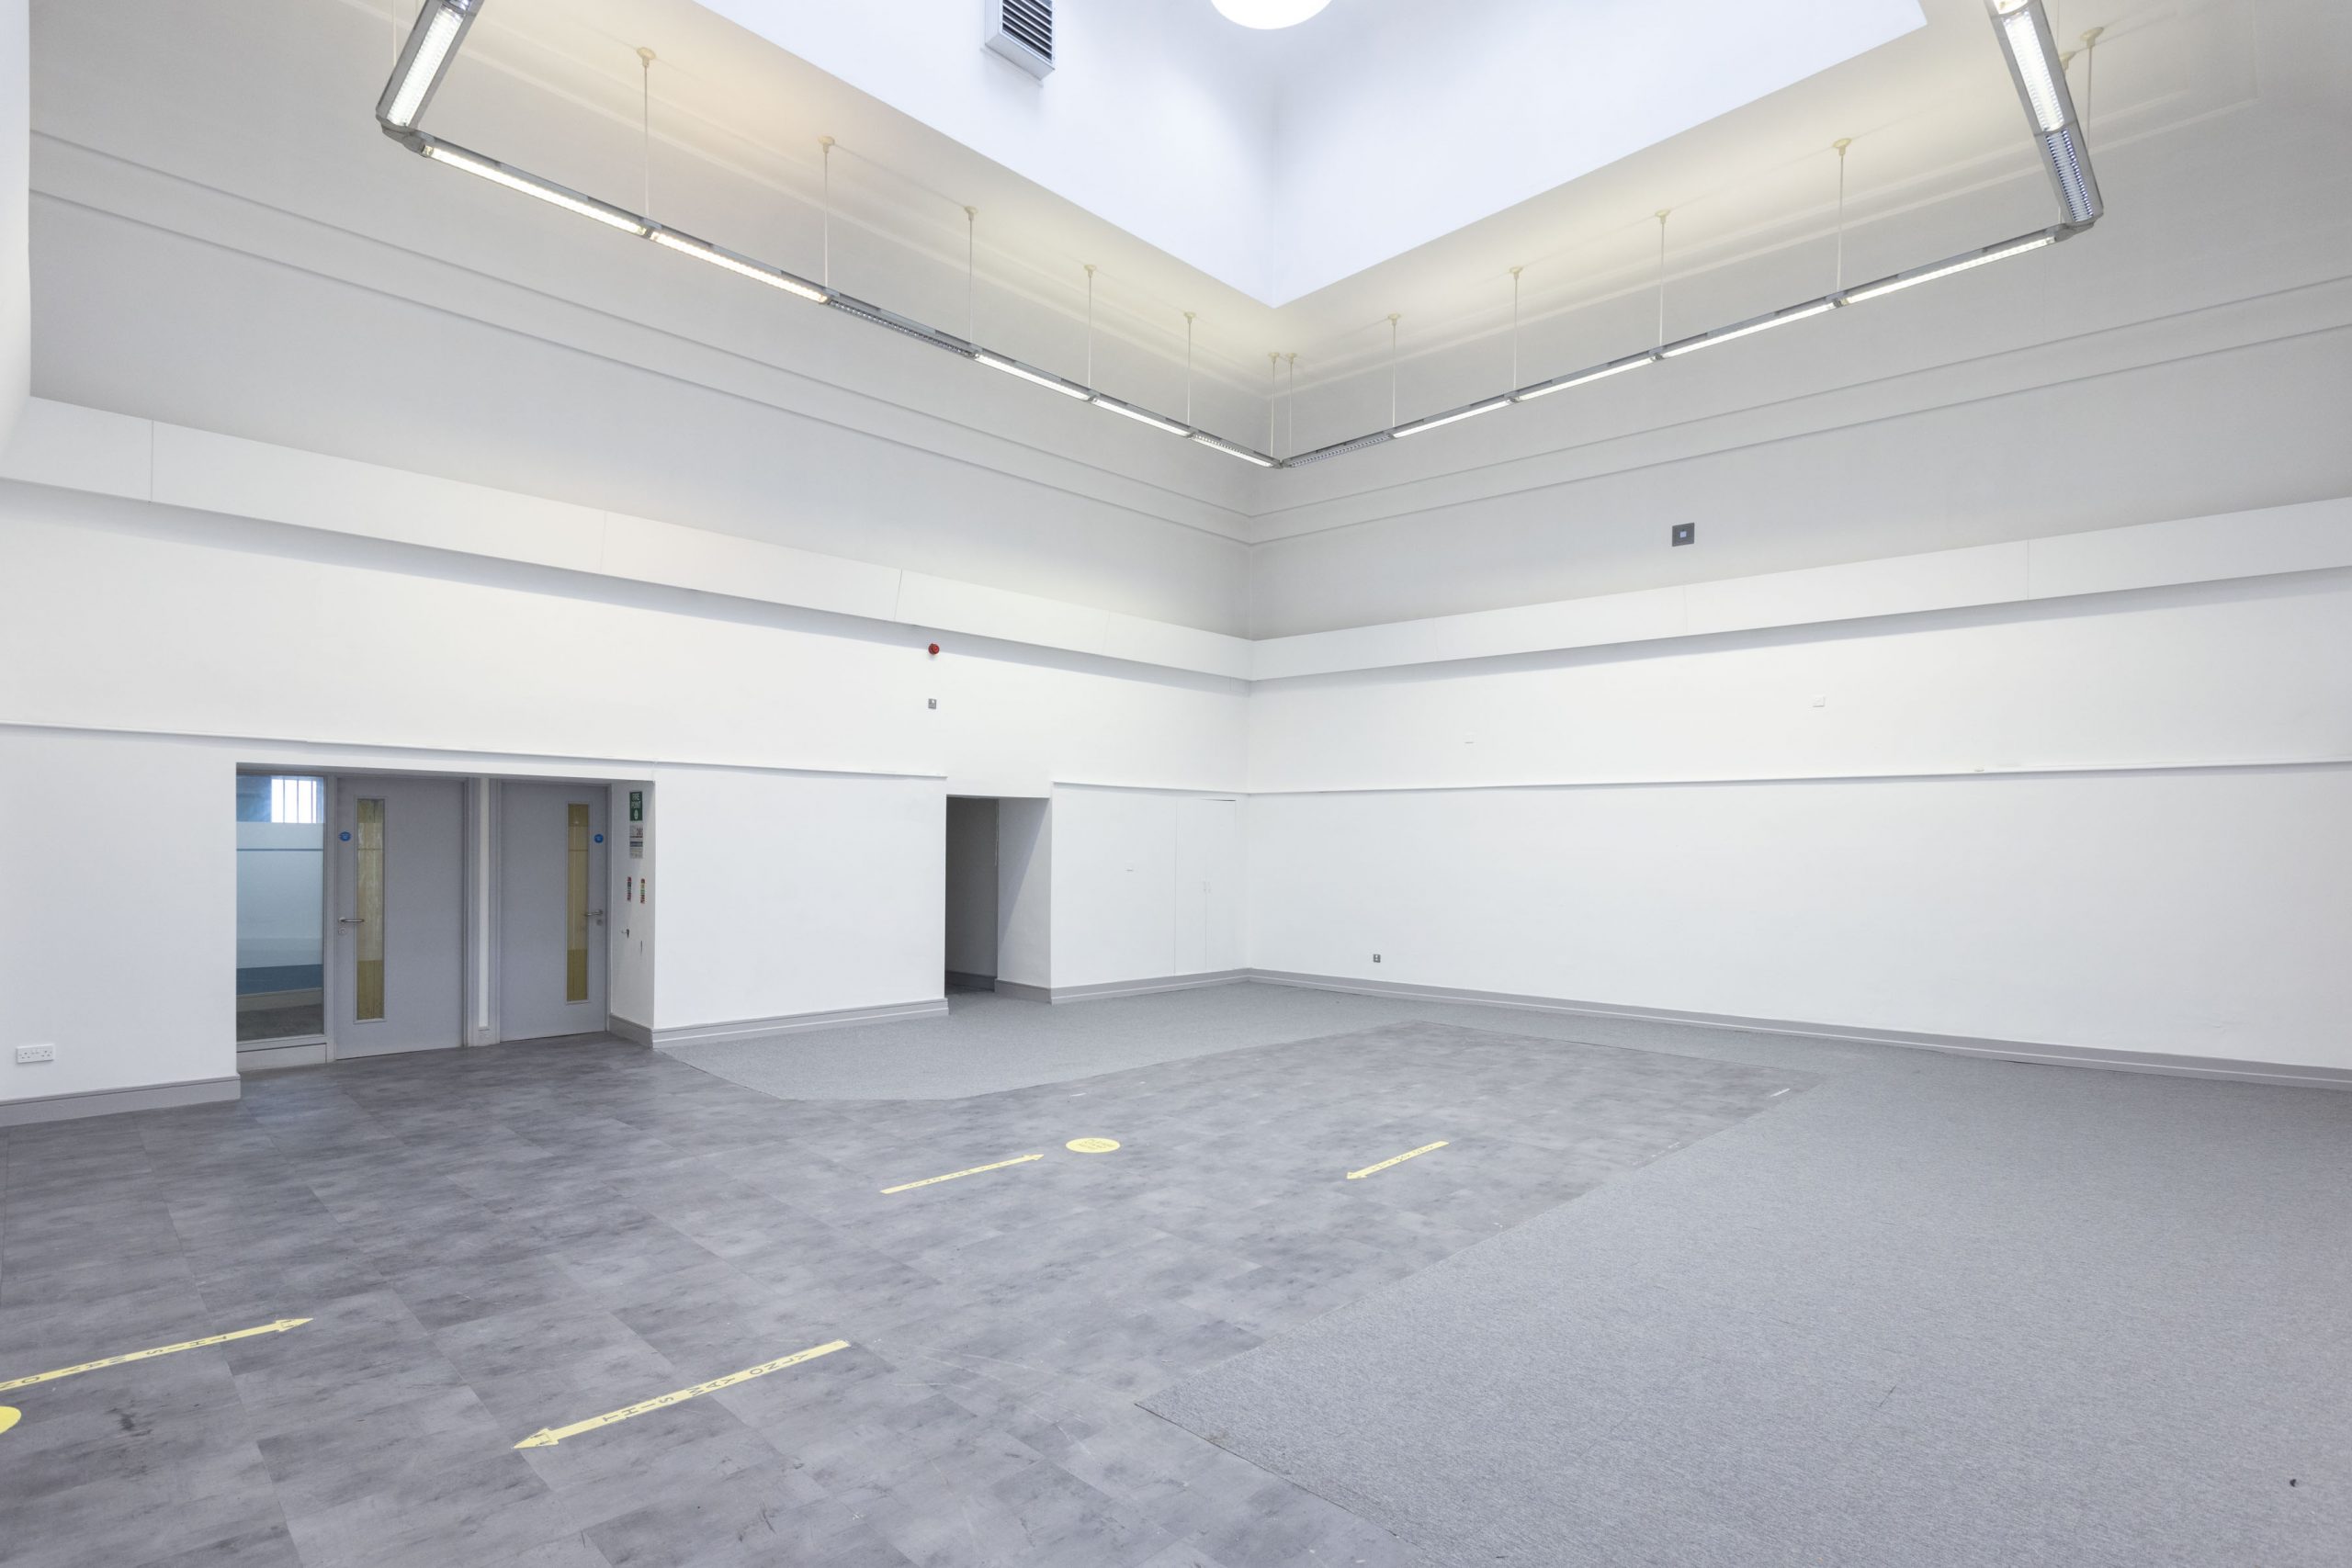 Picture of The Bank with grey floors and white walls, wide open space.